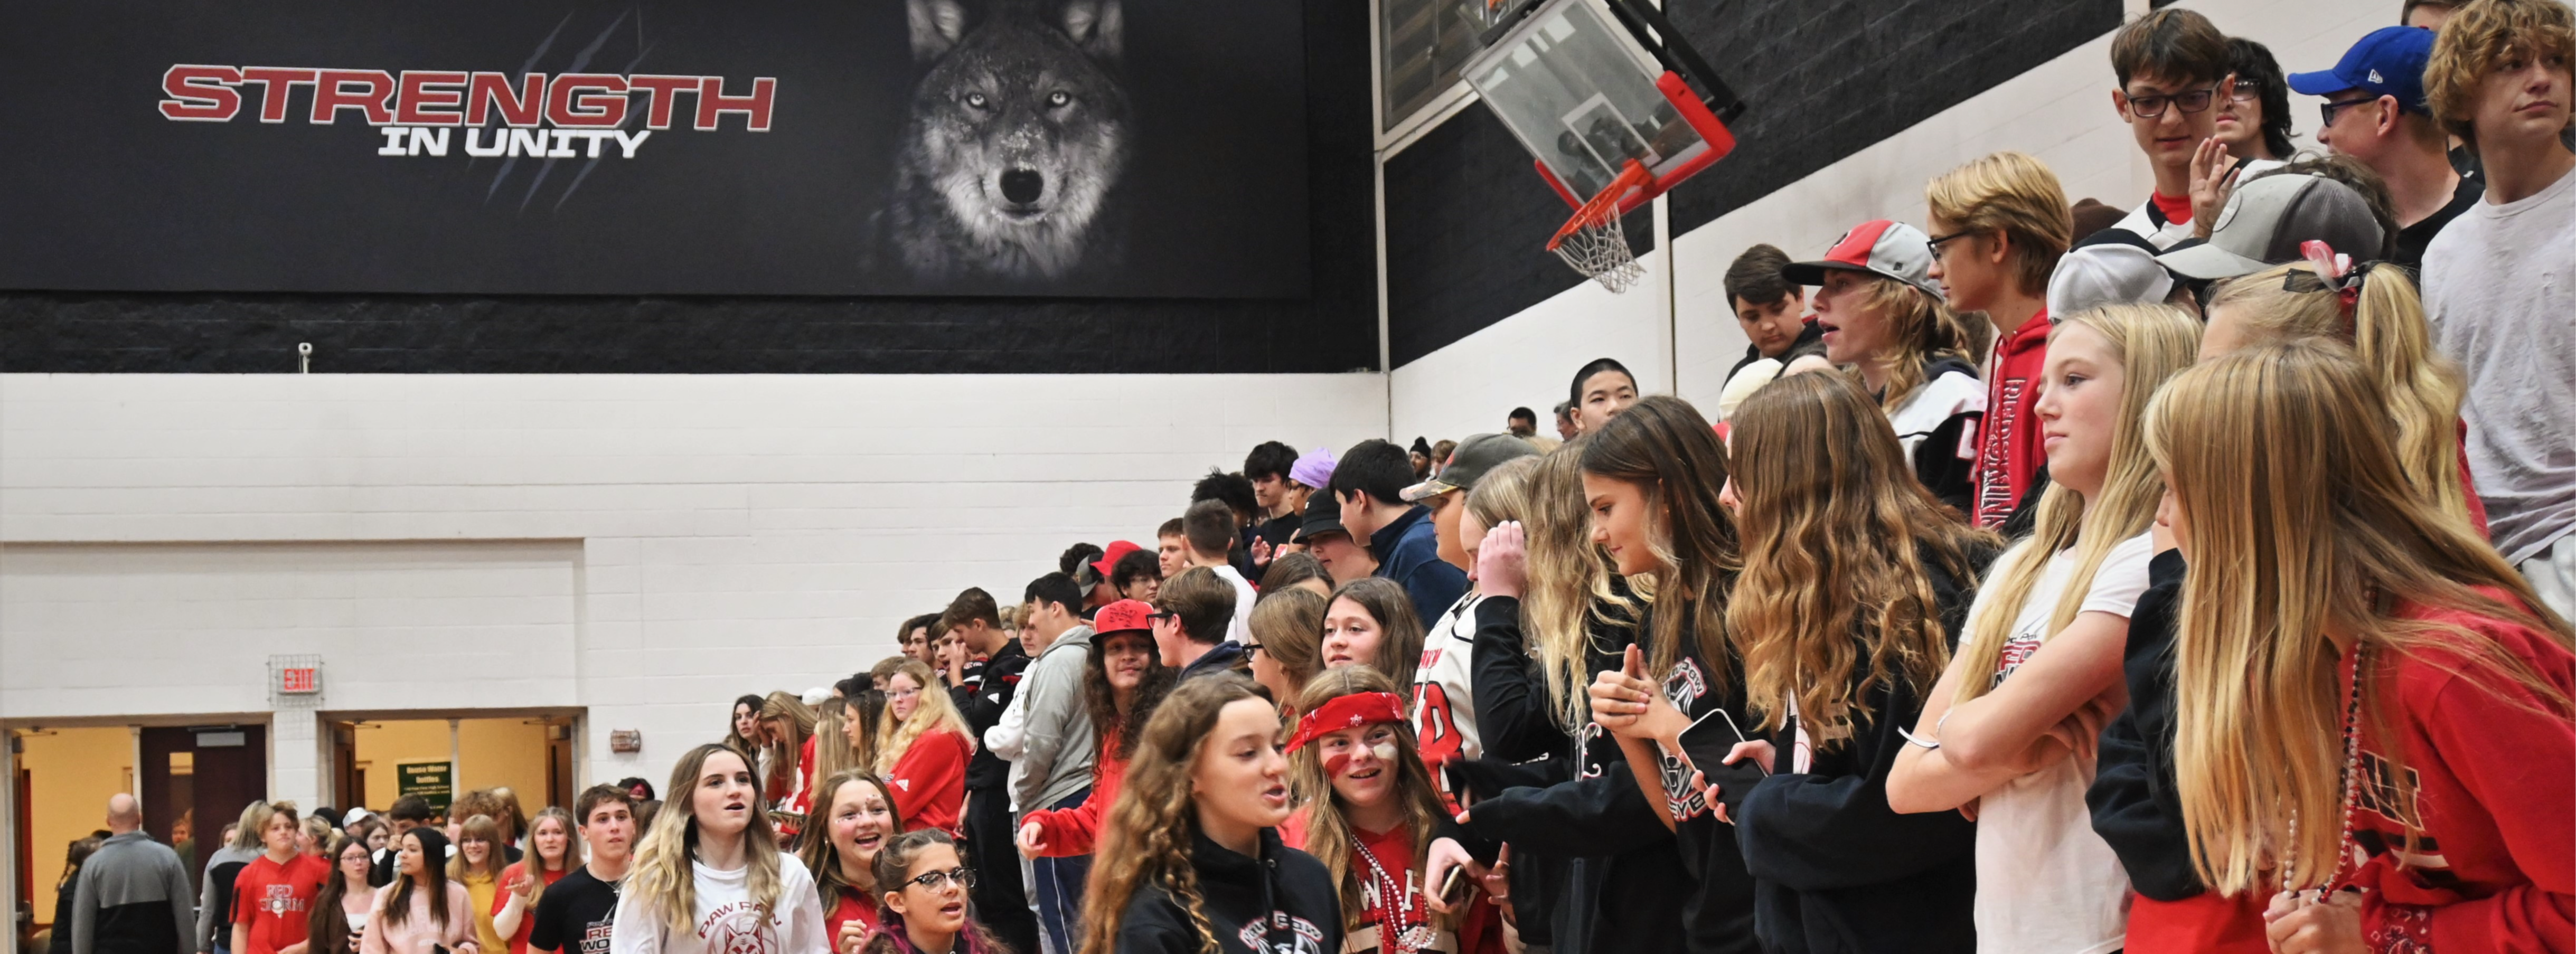 Students entering the High School gym during a pep rally.